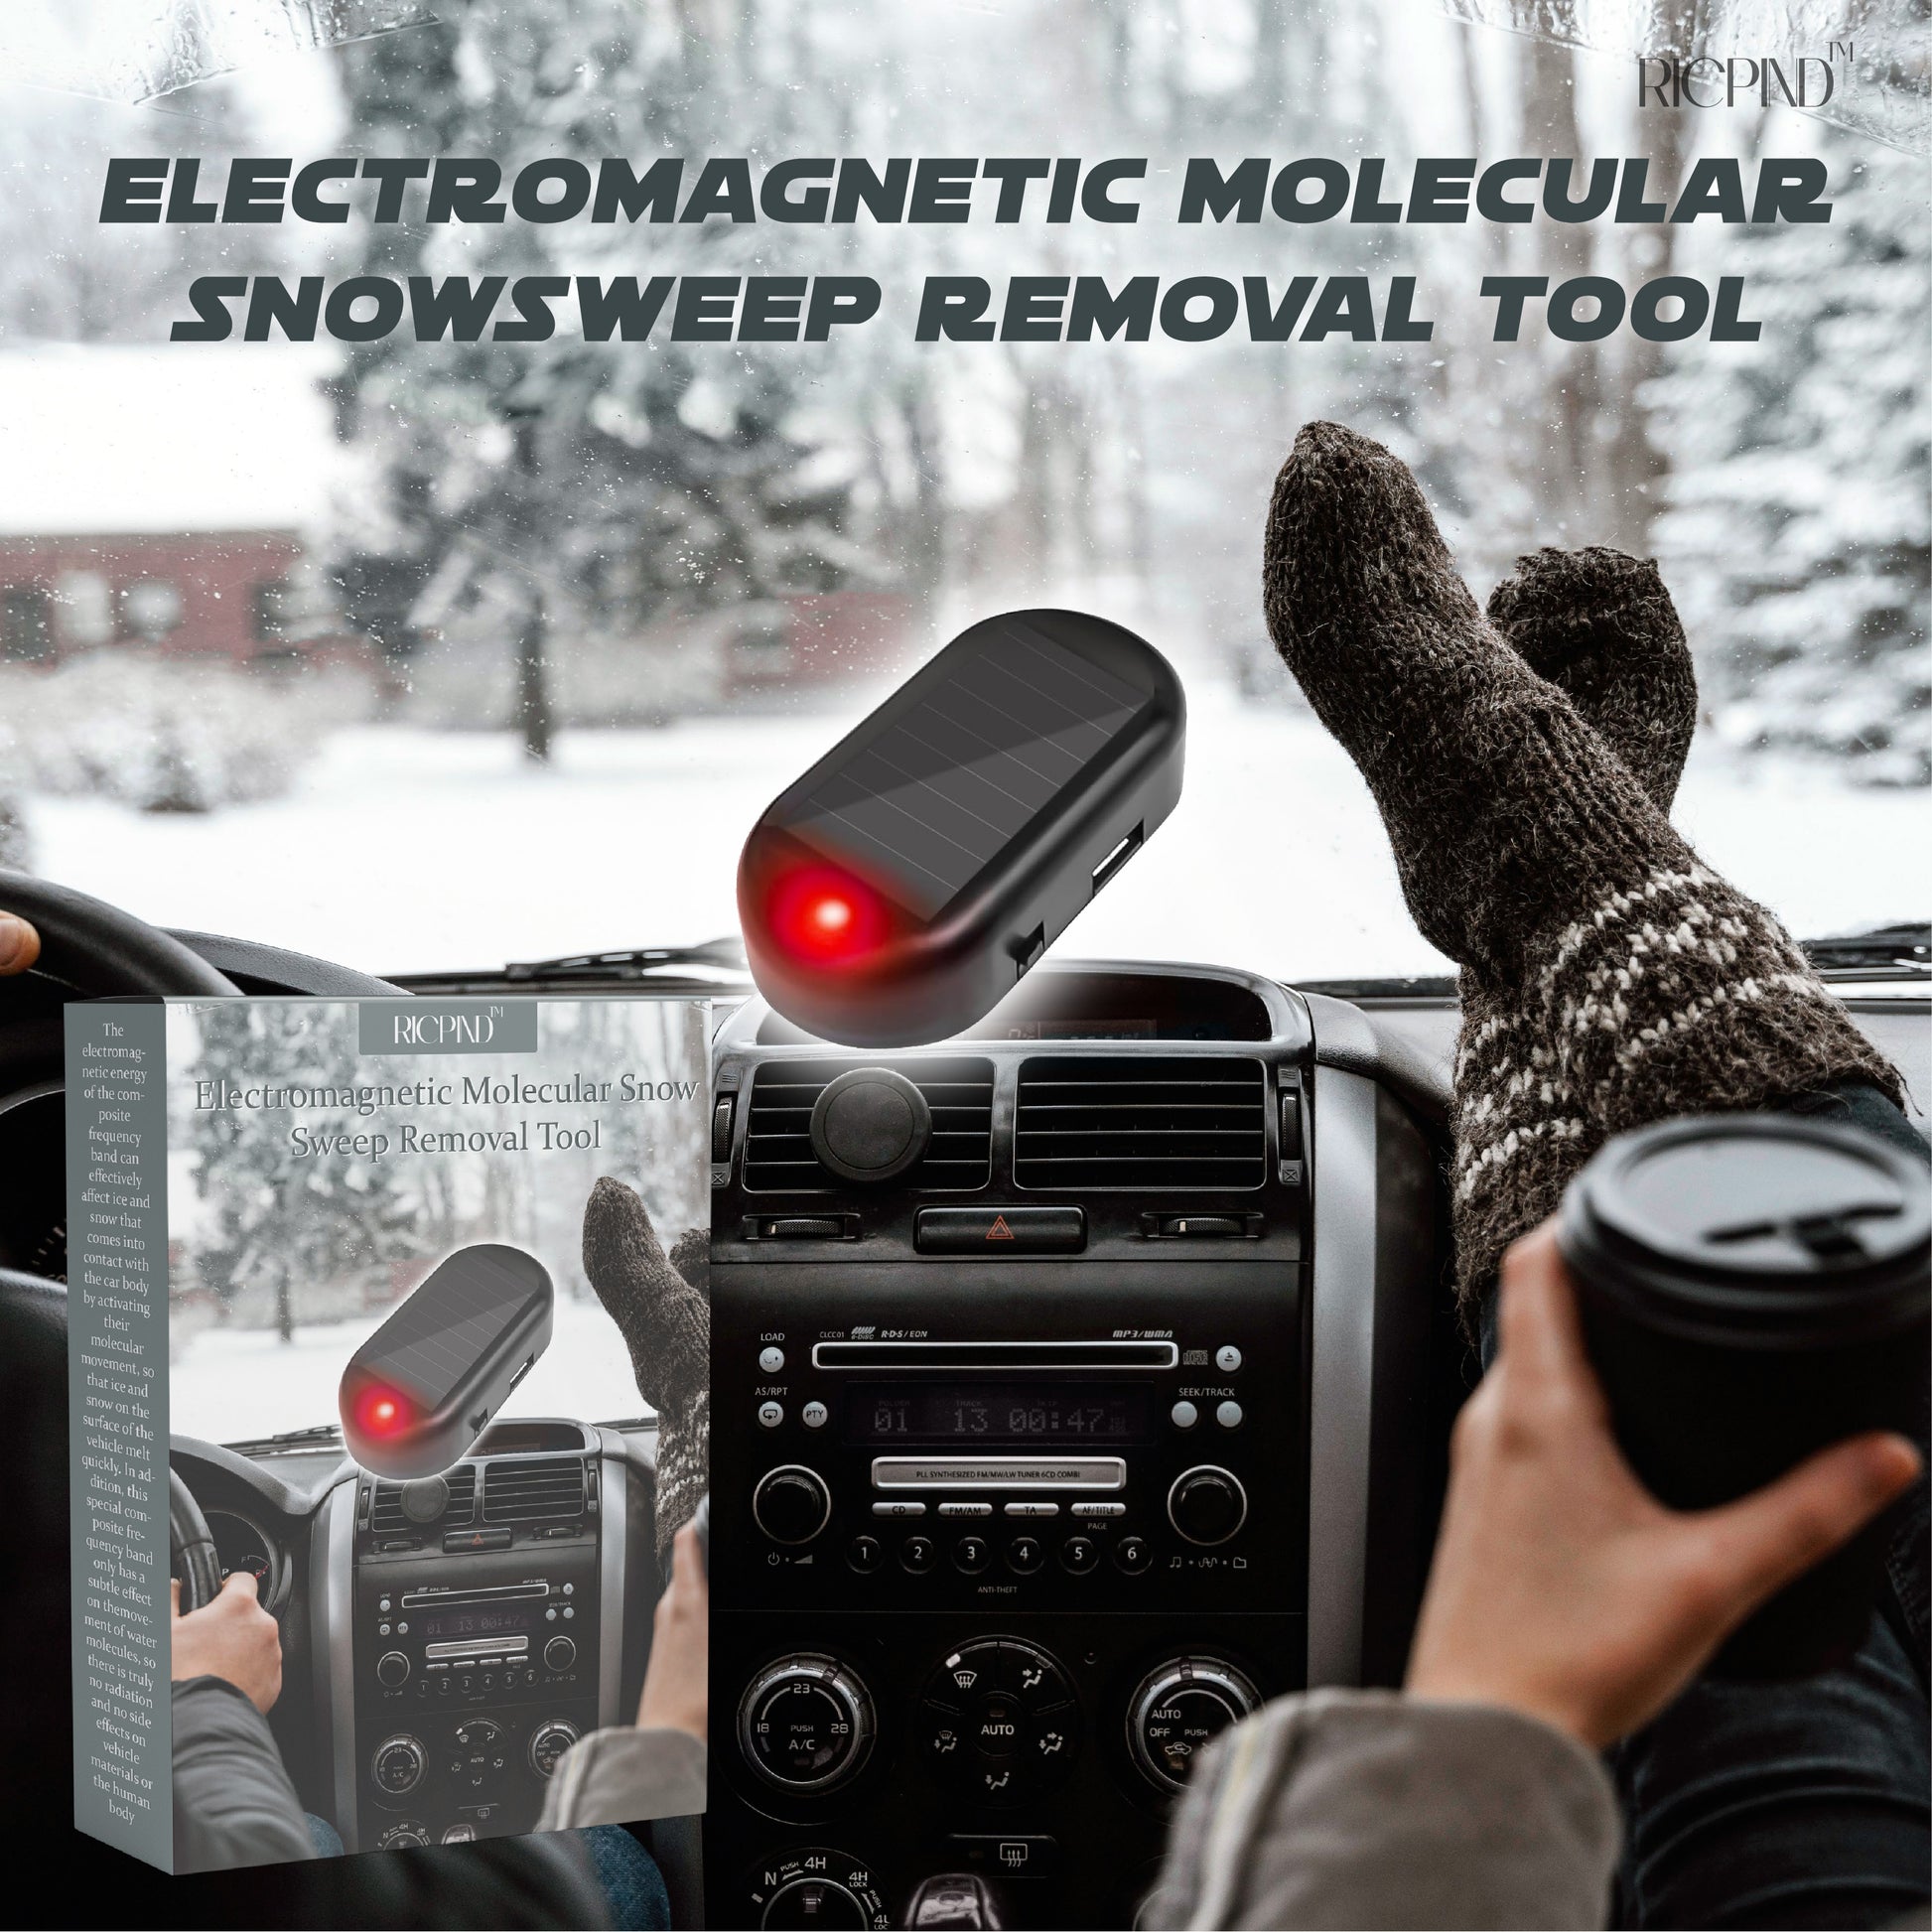 RICPIND Electromagnetic Molecular SnowSweep Removal Tool